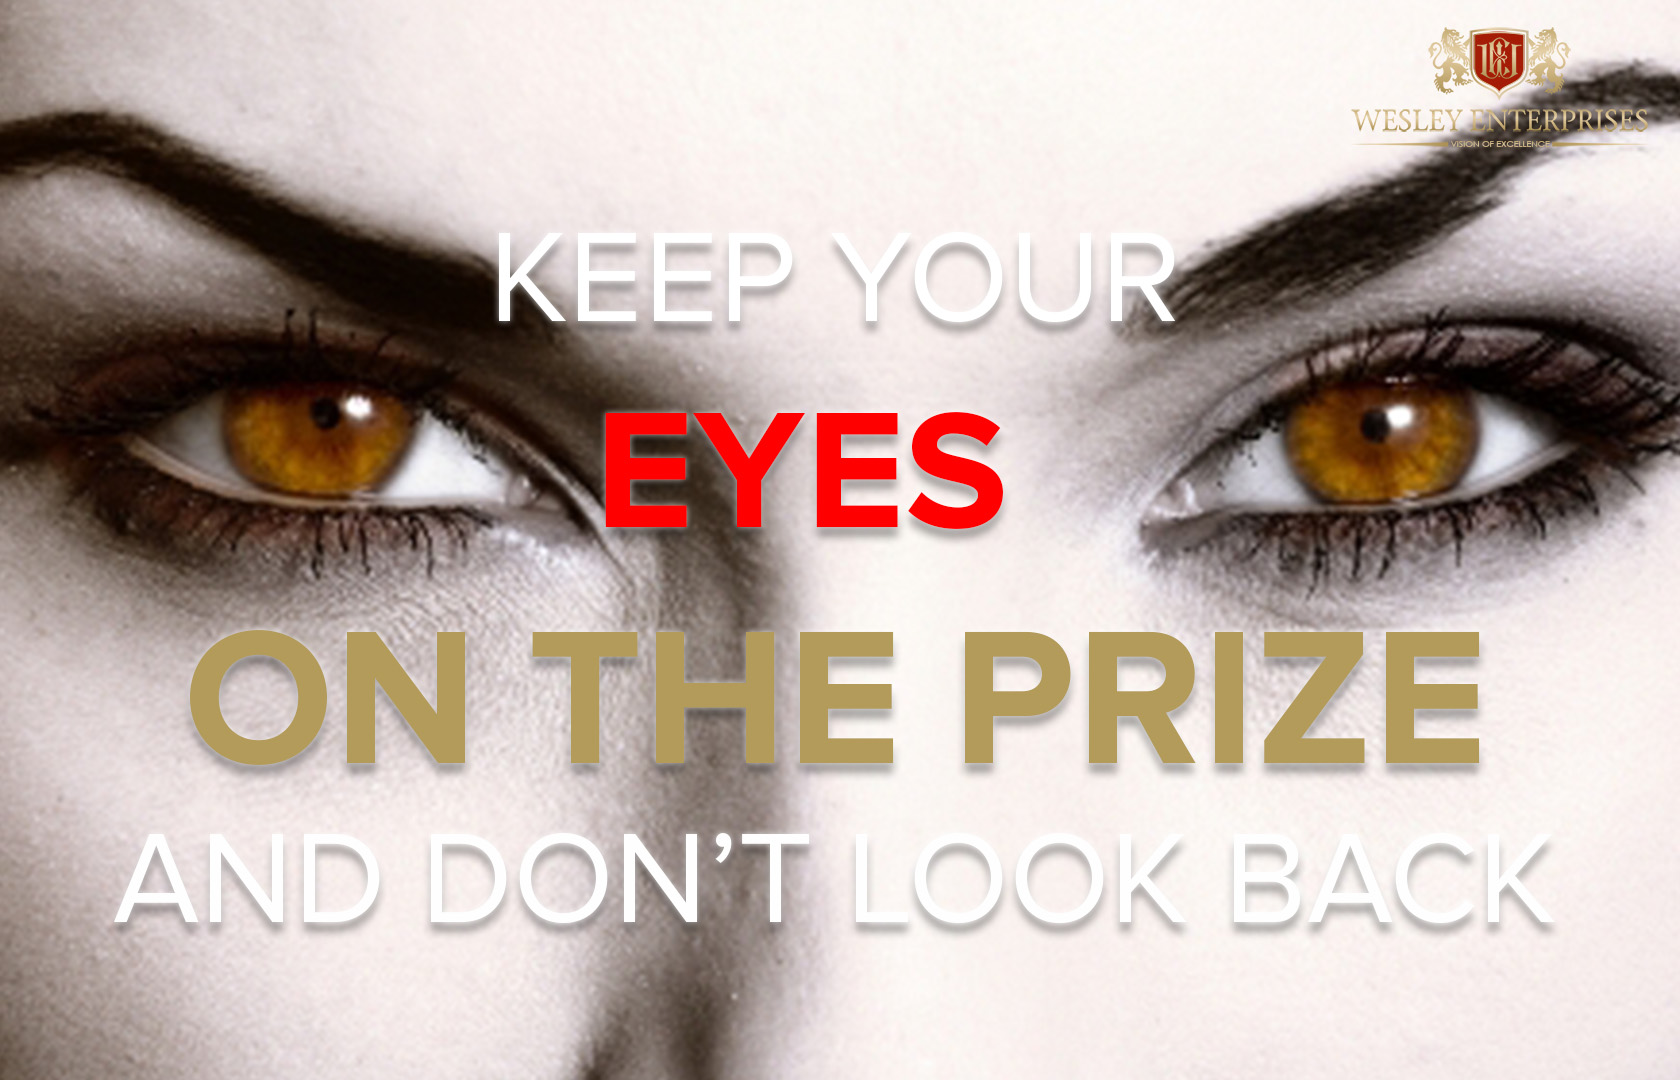 Keep your eyes on the prize